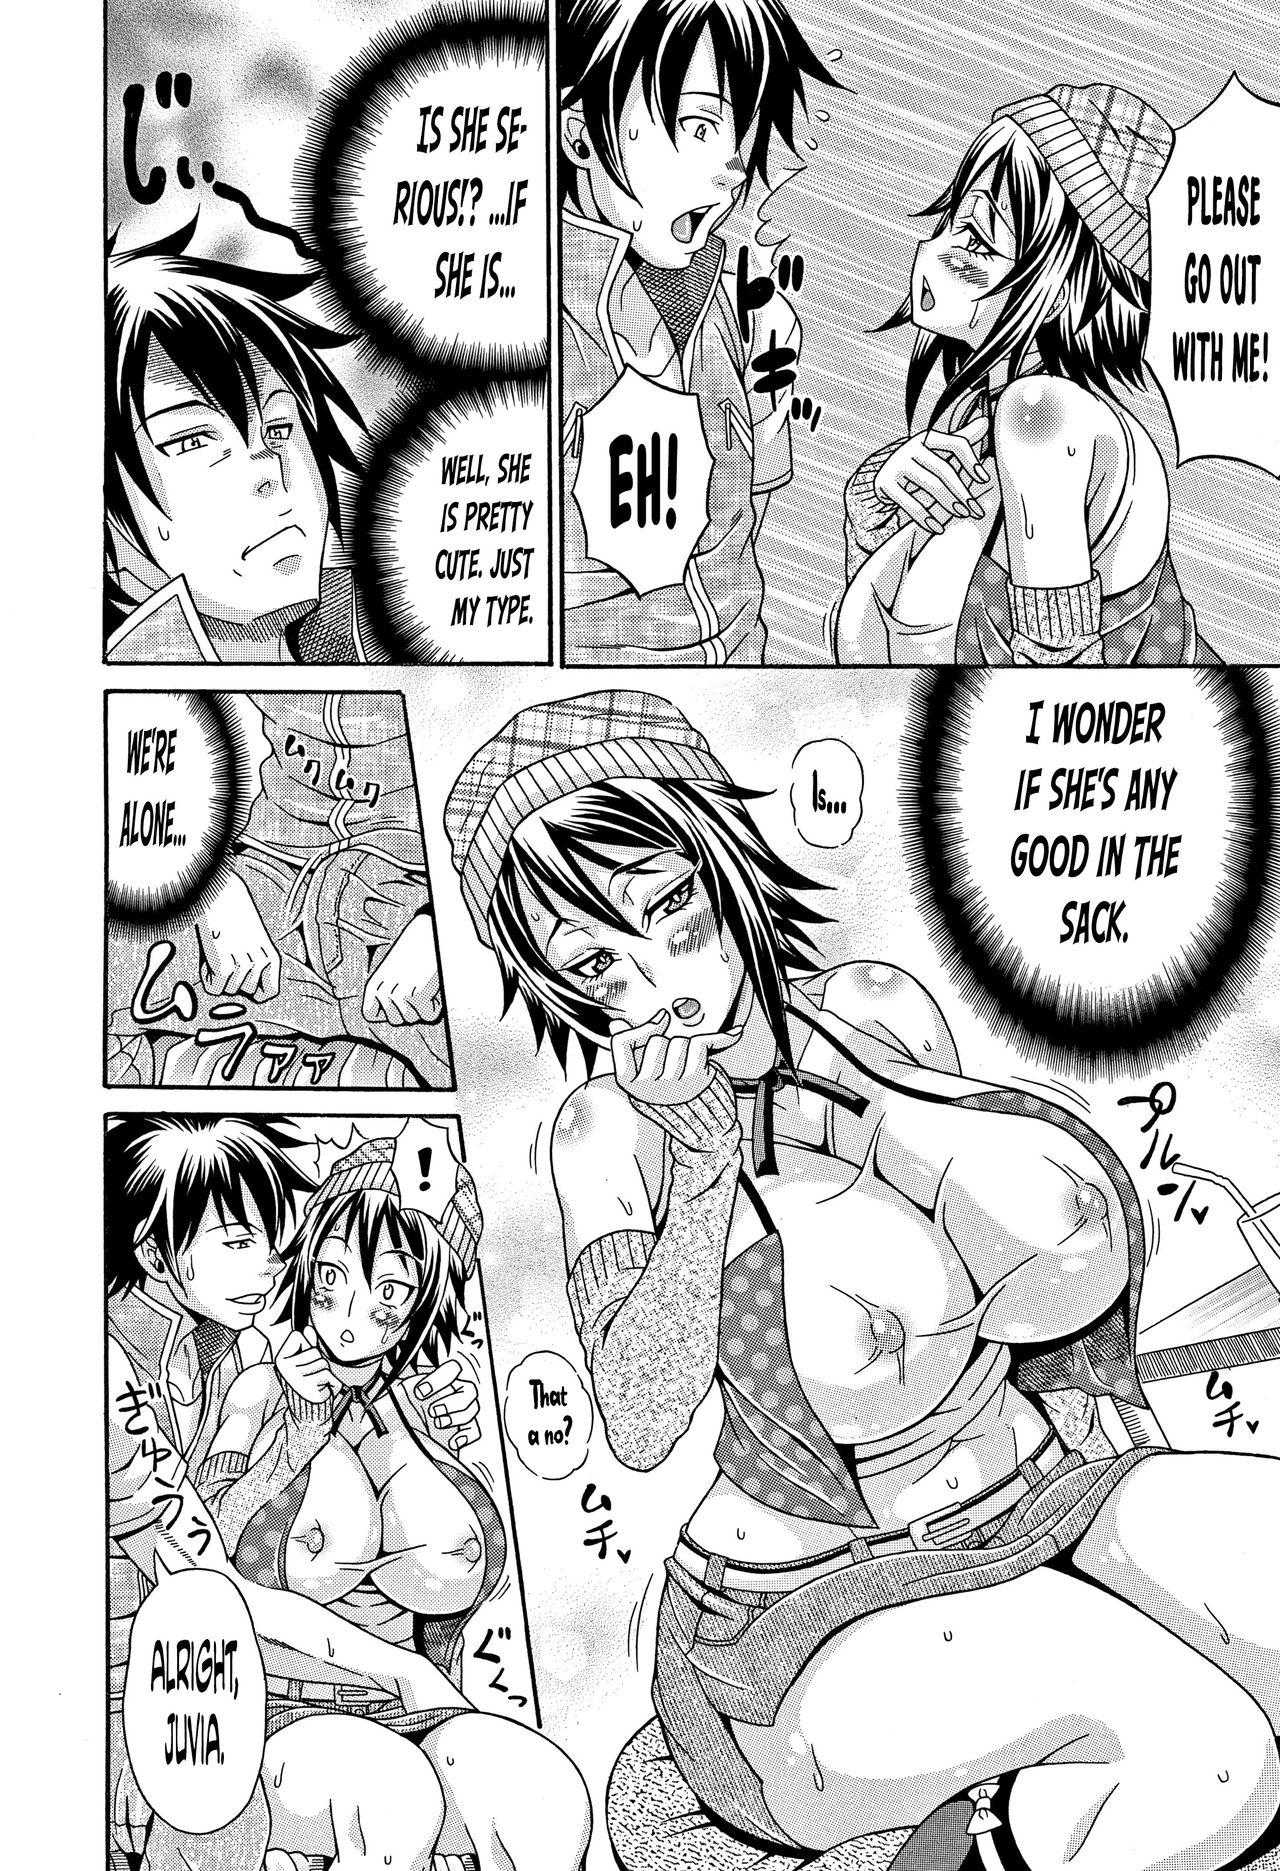 [Andou Hiroyuki] Mamire Chichi - Sticky Tits Feel Hot All Over. Ch.1-6 [English] [doujin-moe.us] 58